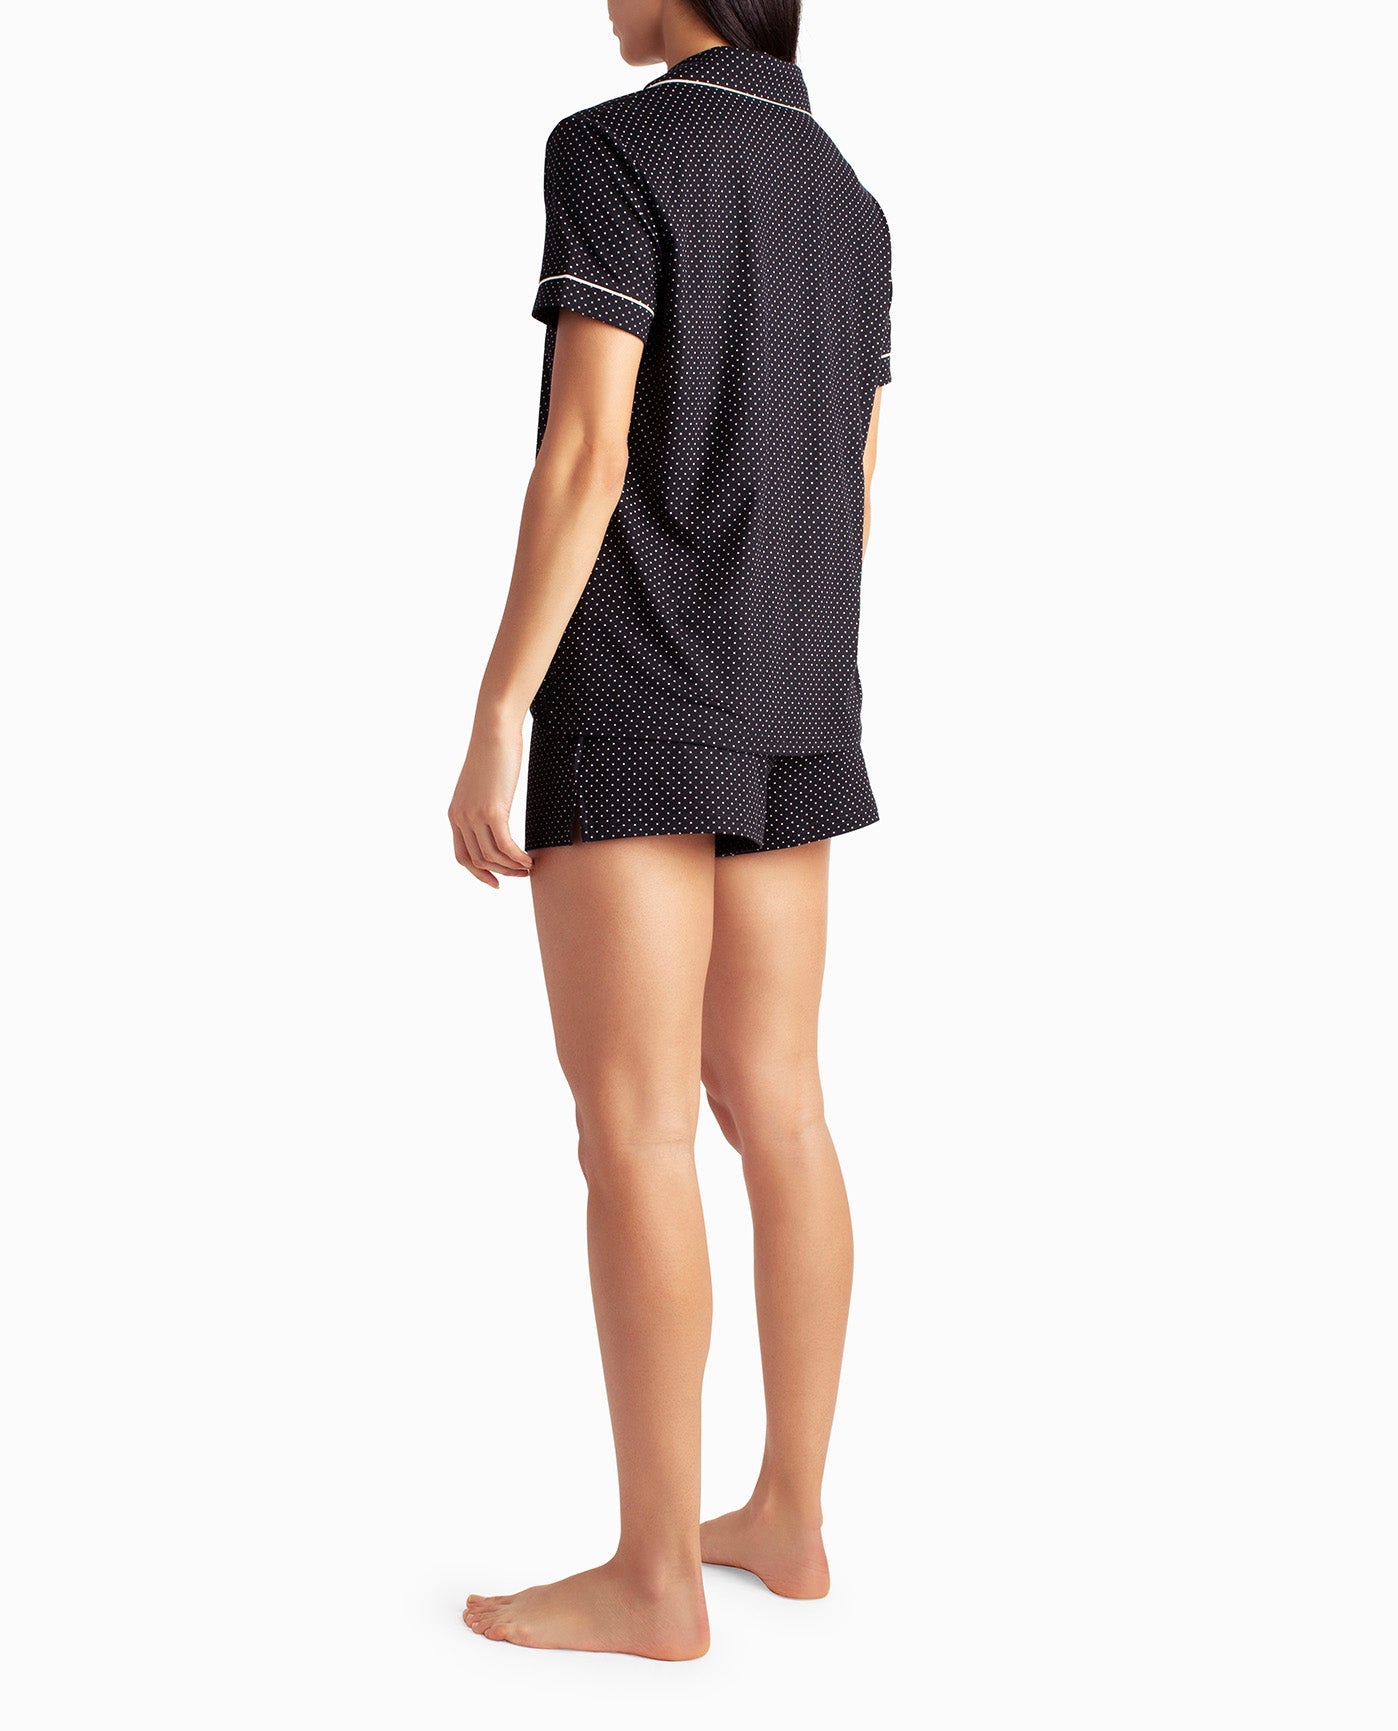 BACK OF PEACHED JERSEY SHIRT AND SHORT TWO-PIECE SLEEPWEAR SET | Black Dot Square